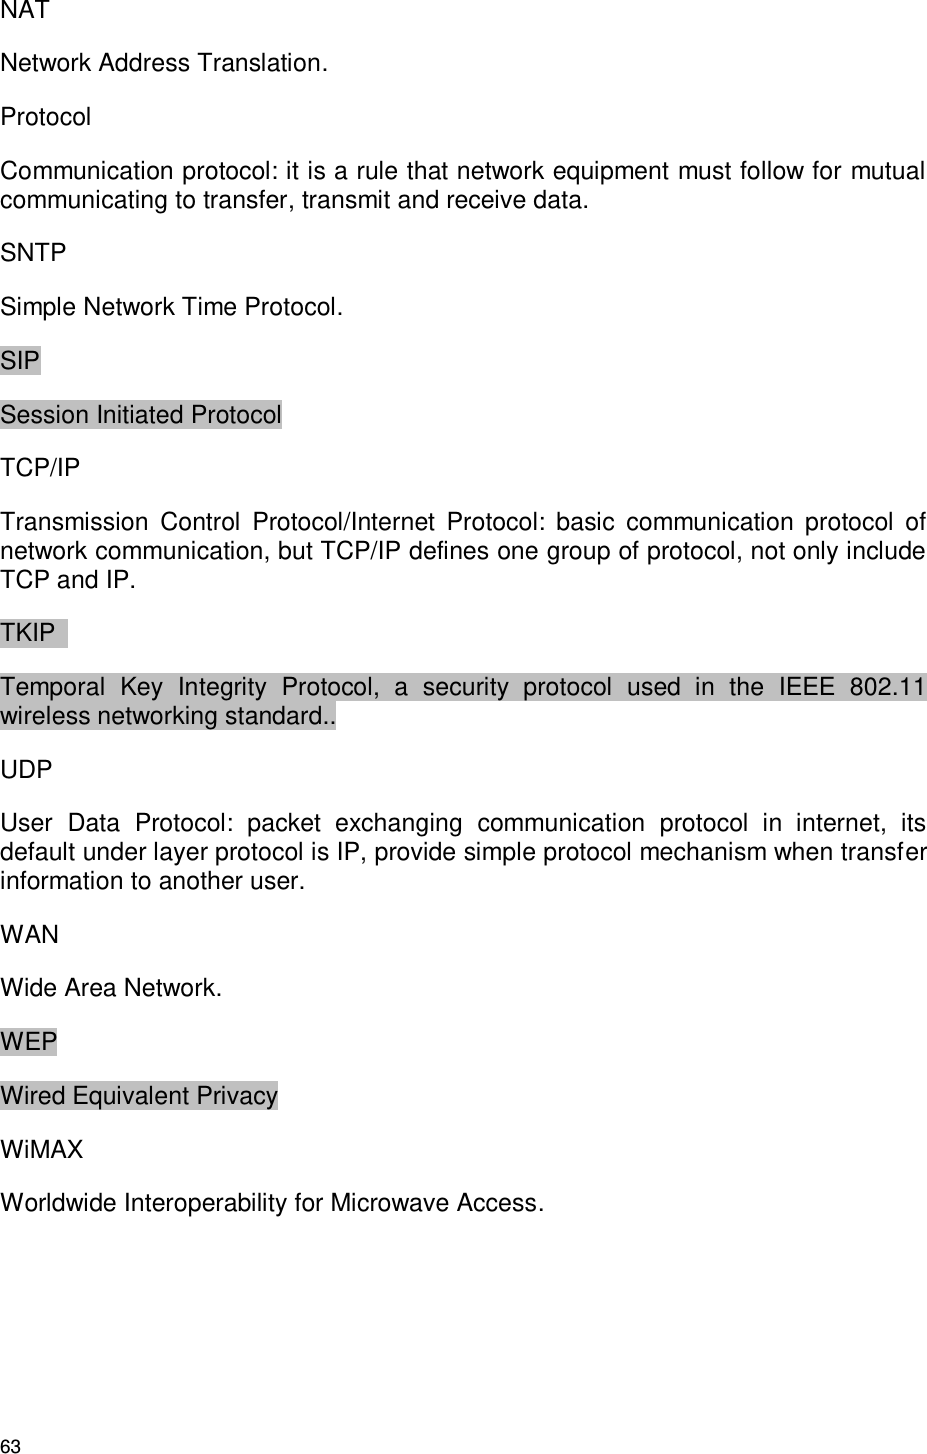 63 NAT Network Address Translation. Protocol Communication protocol: it is a rule that network equipment must follow for mutual communicating to transfer, transmit and receive data. SNTP Simple Network Time Protocol. SIP Session Initiated Protocol TCP/IP Transmission  Control  Protocol/Internet  Protocol:  basic  communication  protocol  of network communication, but TCP/IP defines one group of protocol, not only include TCP and IP. TKIP   Temporal  Key  Integrity  Protocol,  a  security  protocol  used  in  the  IEEE  802.11 wireless networking standard.. UDP User  Data  Protocol:  packet  exchanging  communication  protocol  in  internet,  its default under layer protocol is IP, provide simple protocol mechanism when transfer information to another user. WAN Wide Area Network. WEP Wired Equivalent Privacy WiMAX Worldwide Interoperability for Microwave Access.   